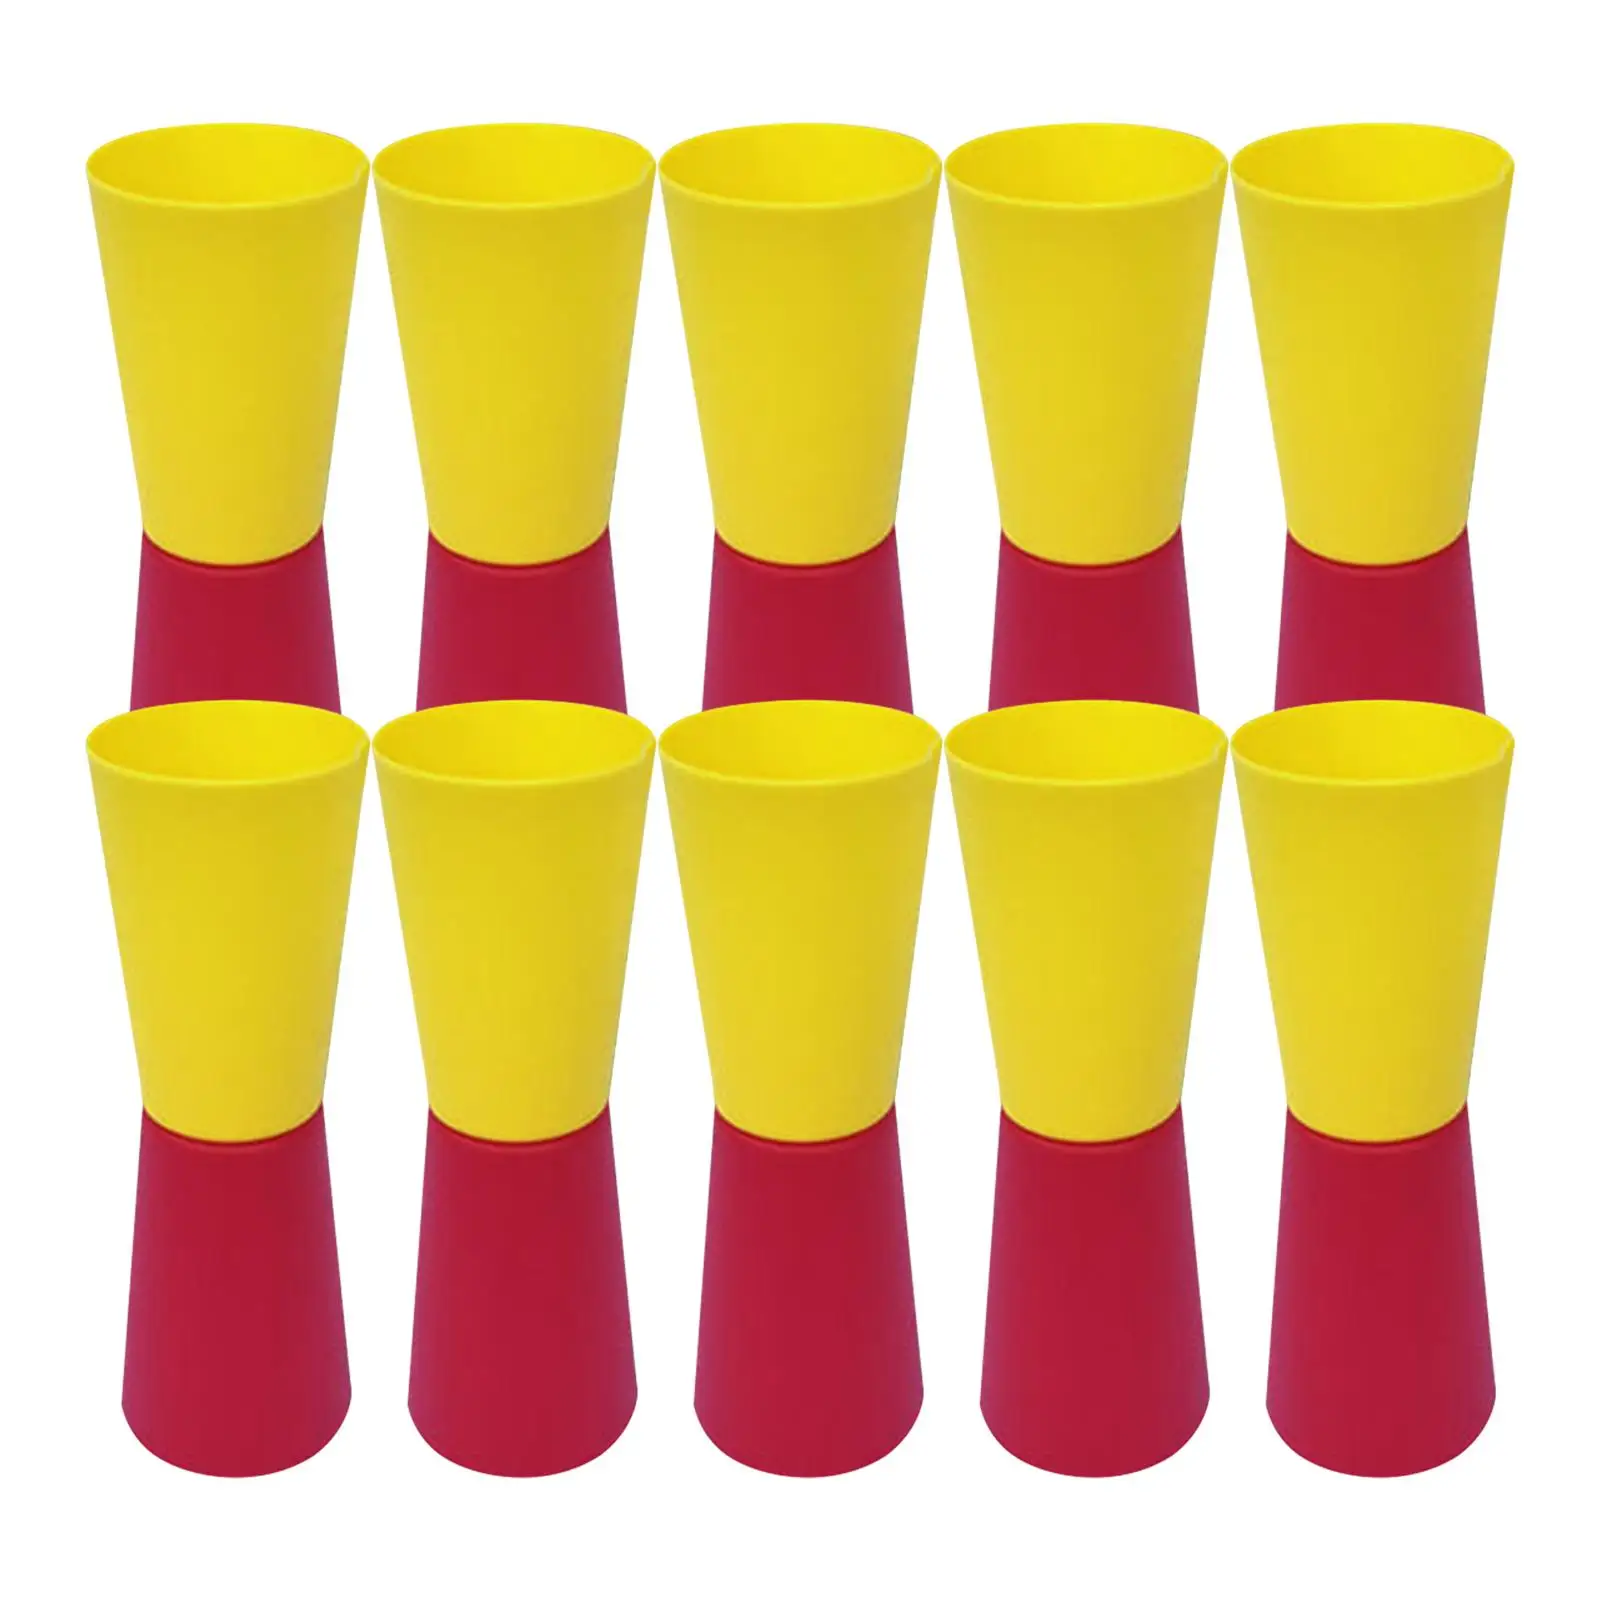 10Pcs Flip Cups Speed Agility Training Sport Equipment Reversed Cups Aid for Kindergarten Gym Rugby Activity Festive with Net